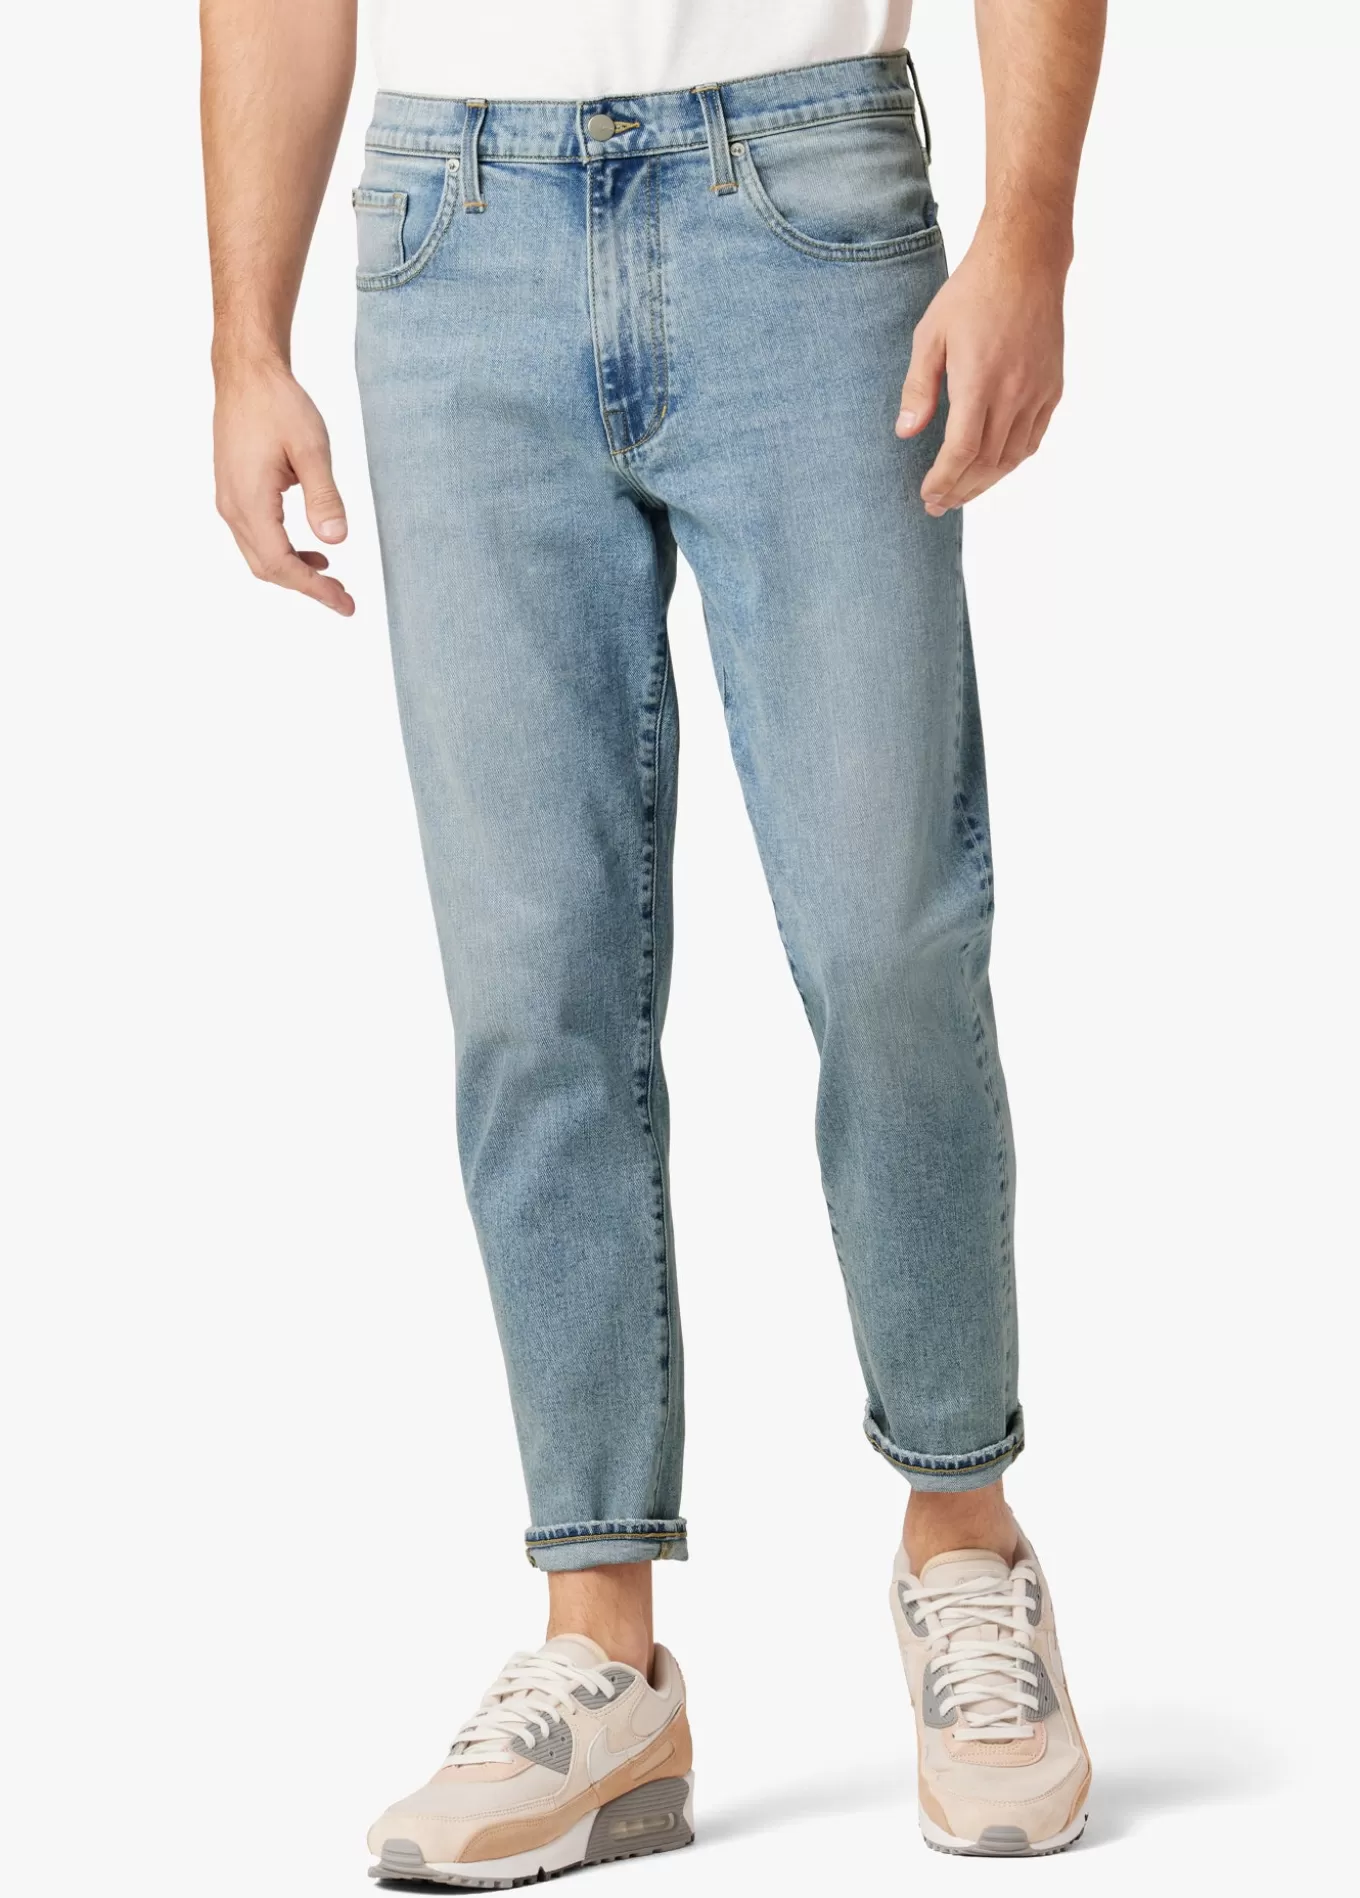 THE DIEGO>Joe’s Jeans Discount